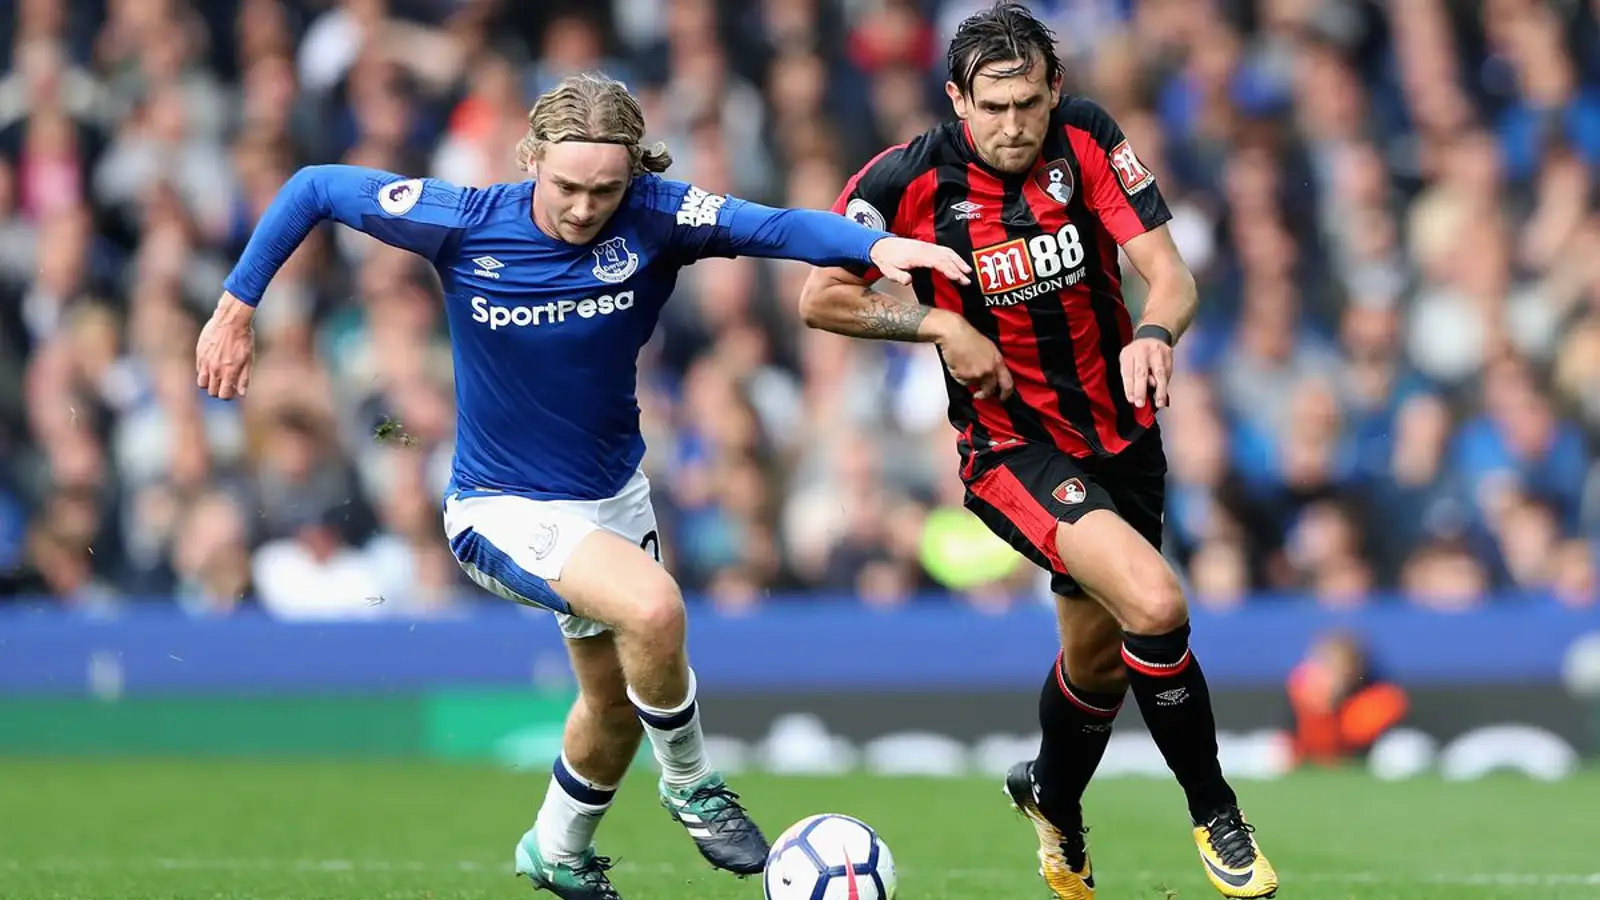 Everton Vs Bournemouth Predictions, Head-to-Head, Team News, Predicted Lineup and Score